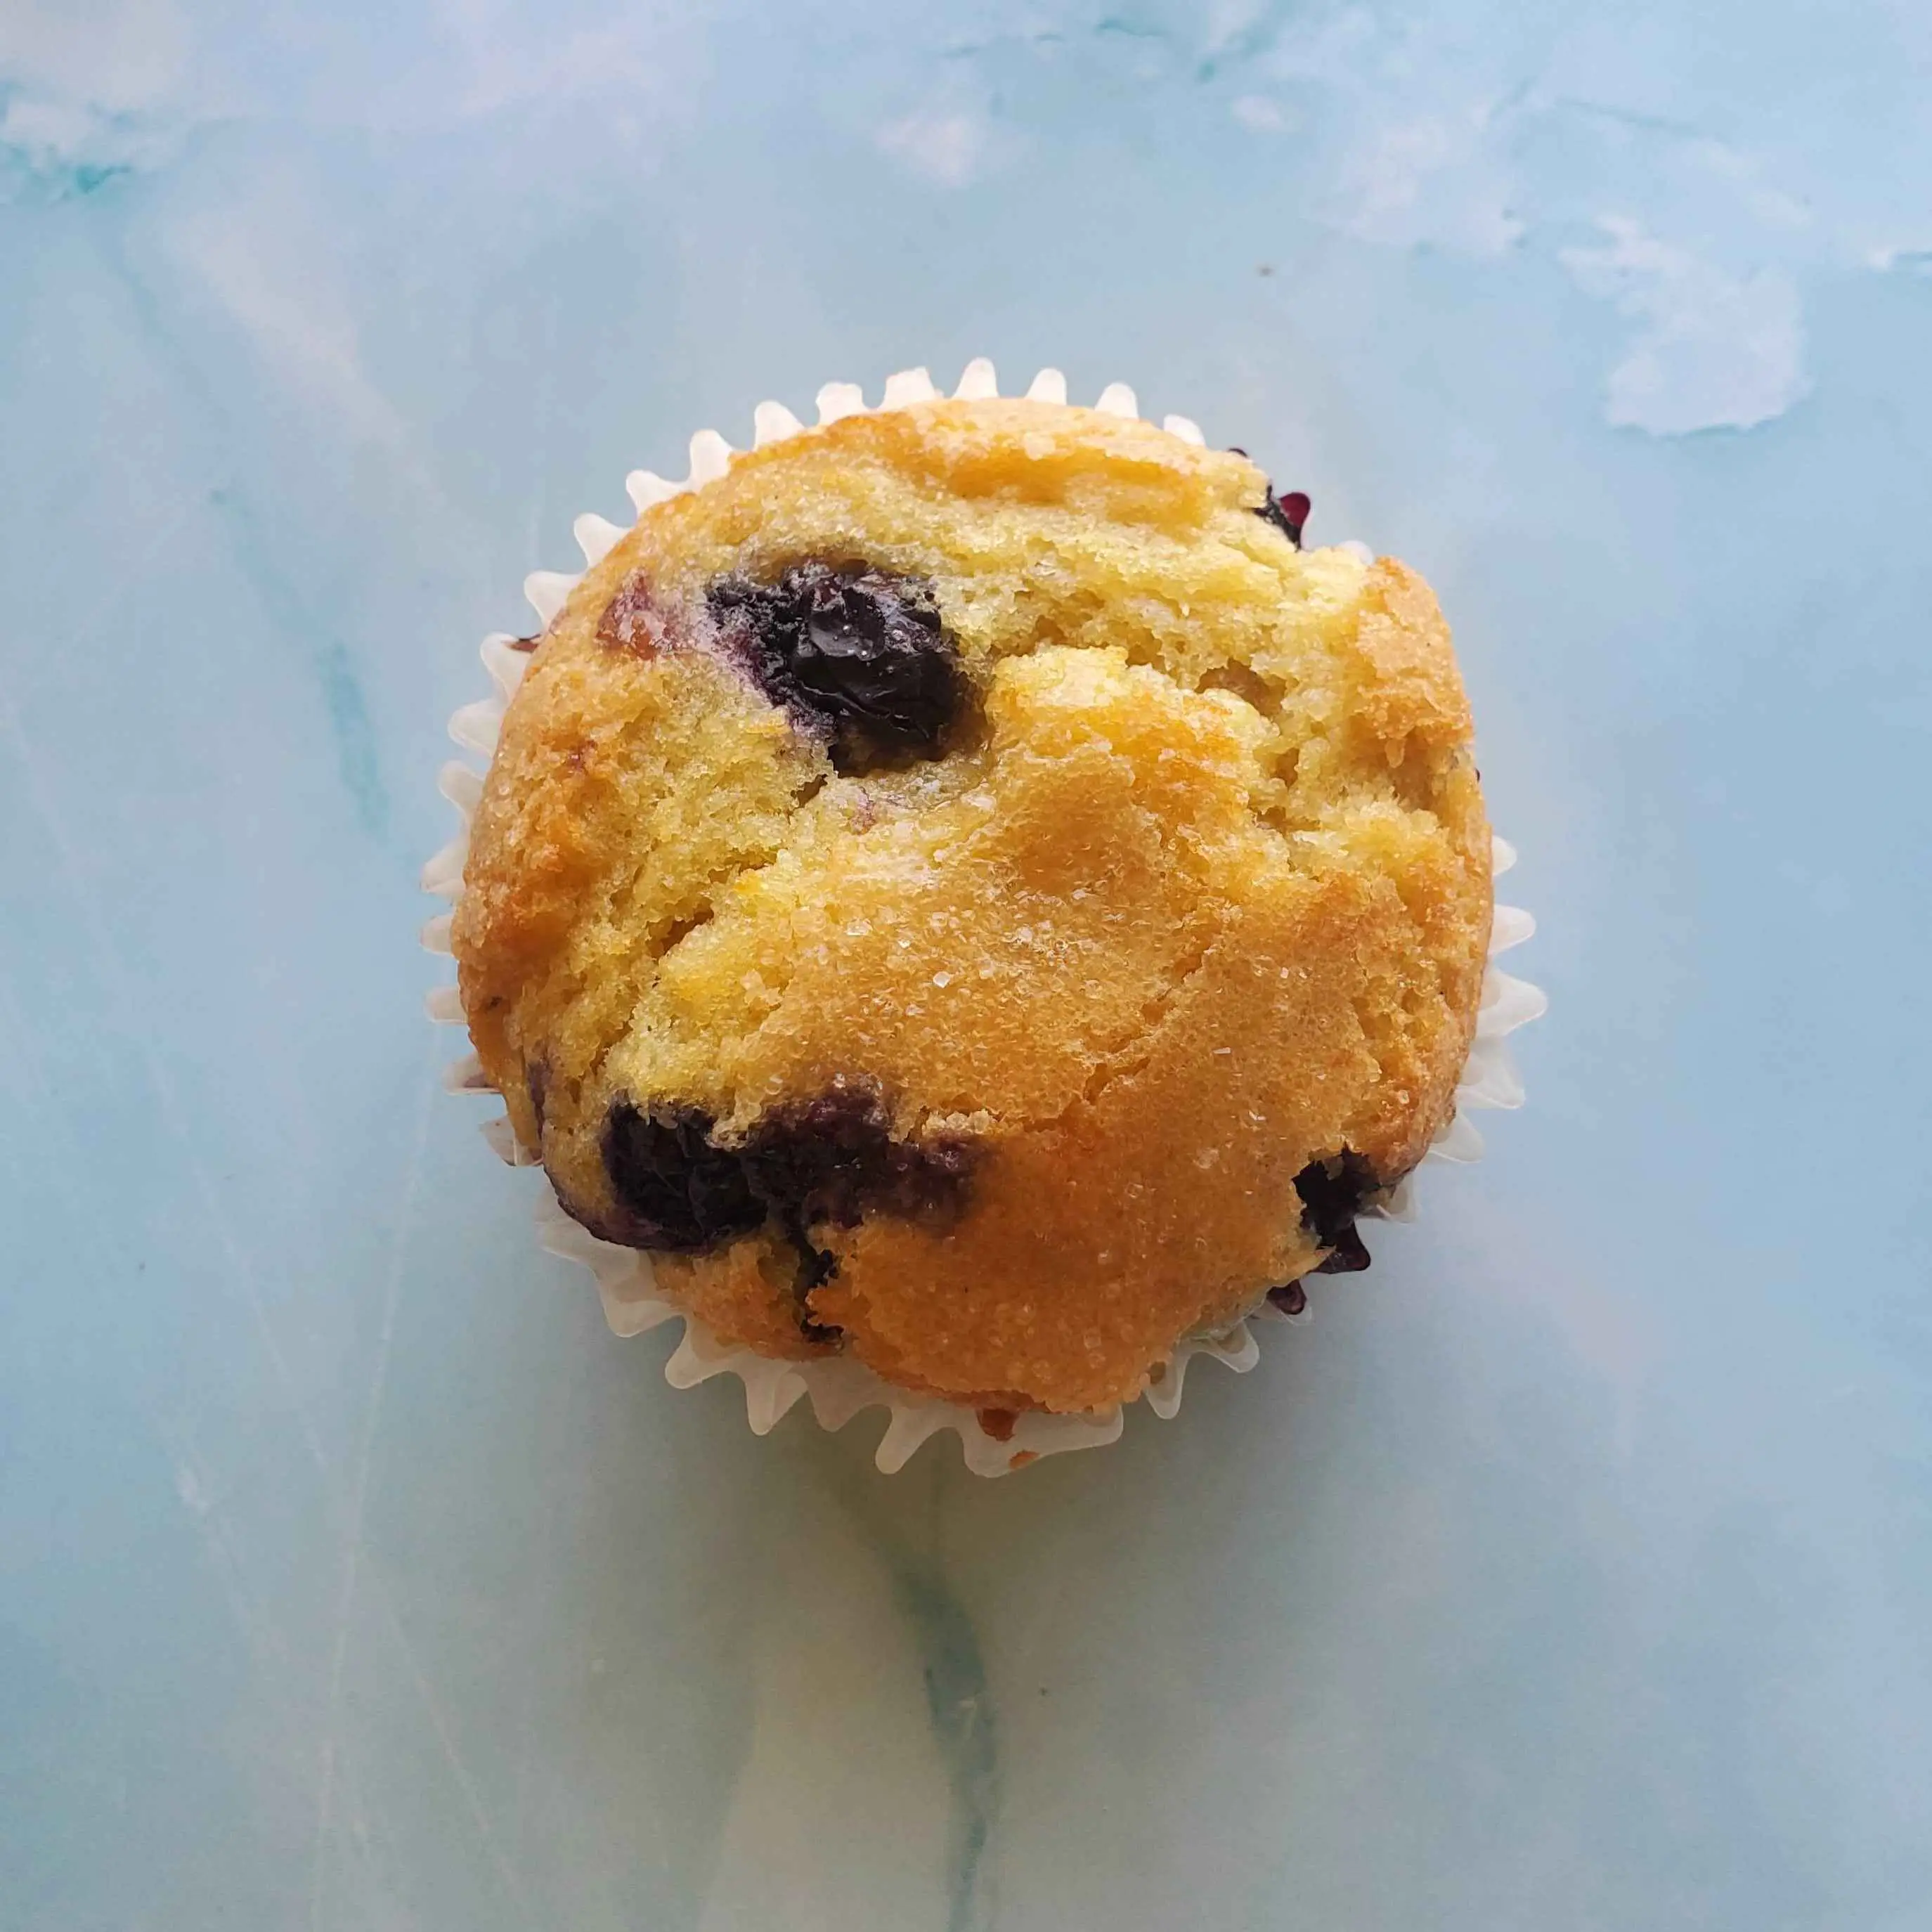 Blueberry Lemon Muffin Delivery